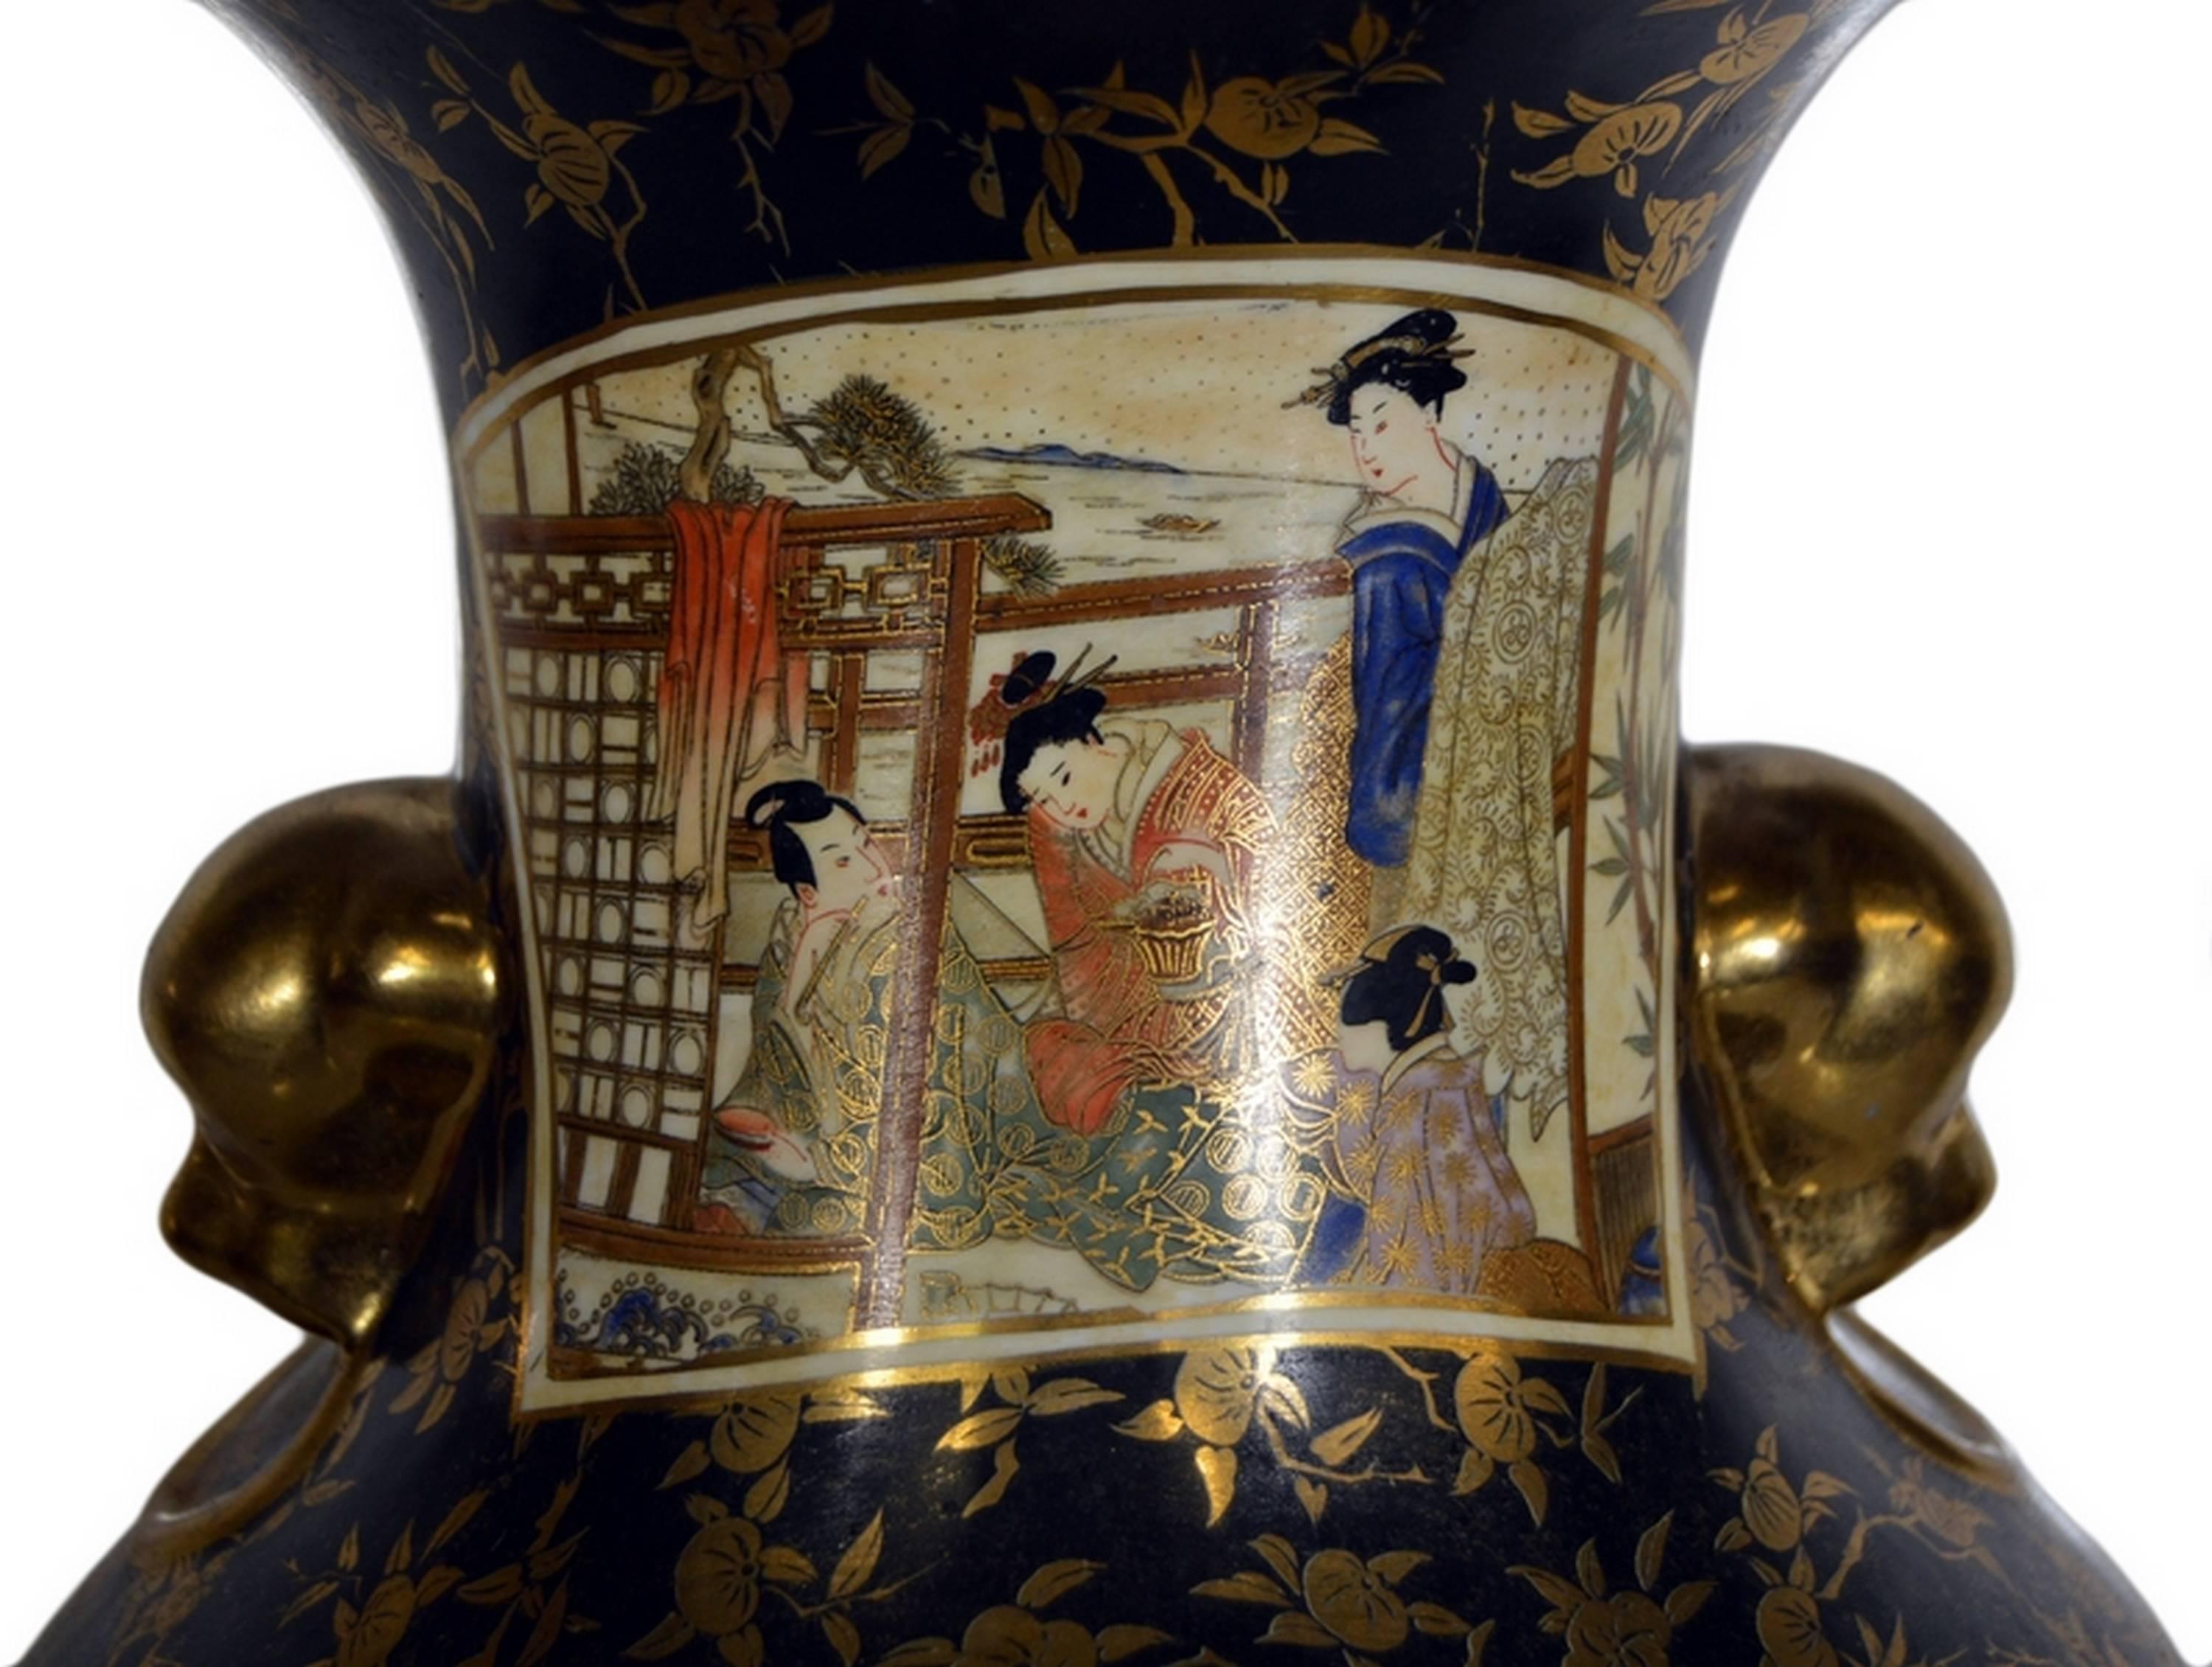 Vintage Hand-Painted Porcelain Vase with Gilded Accents from 20th Century, China In Excellent Condition For Sale In Yonkers, NY